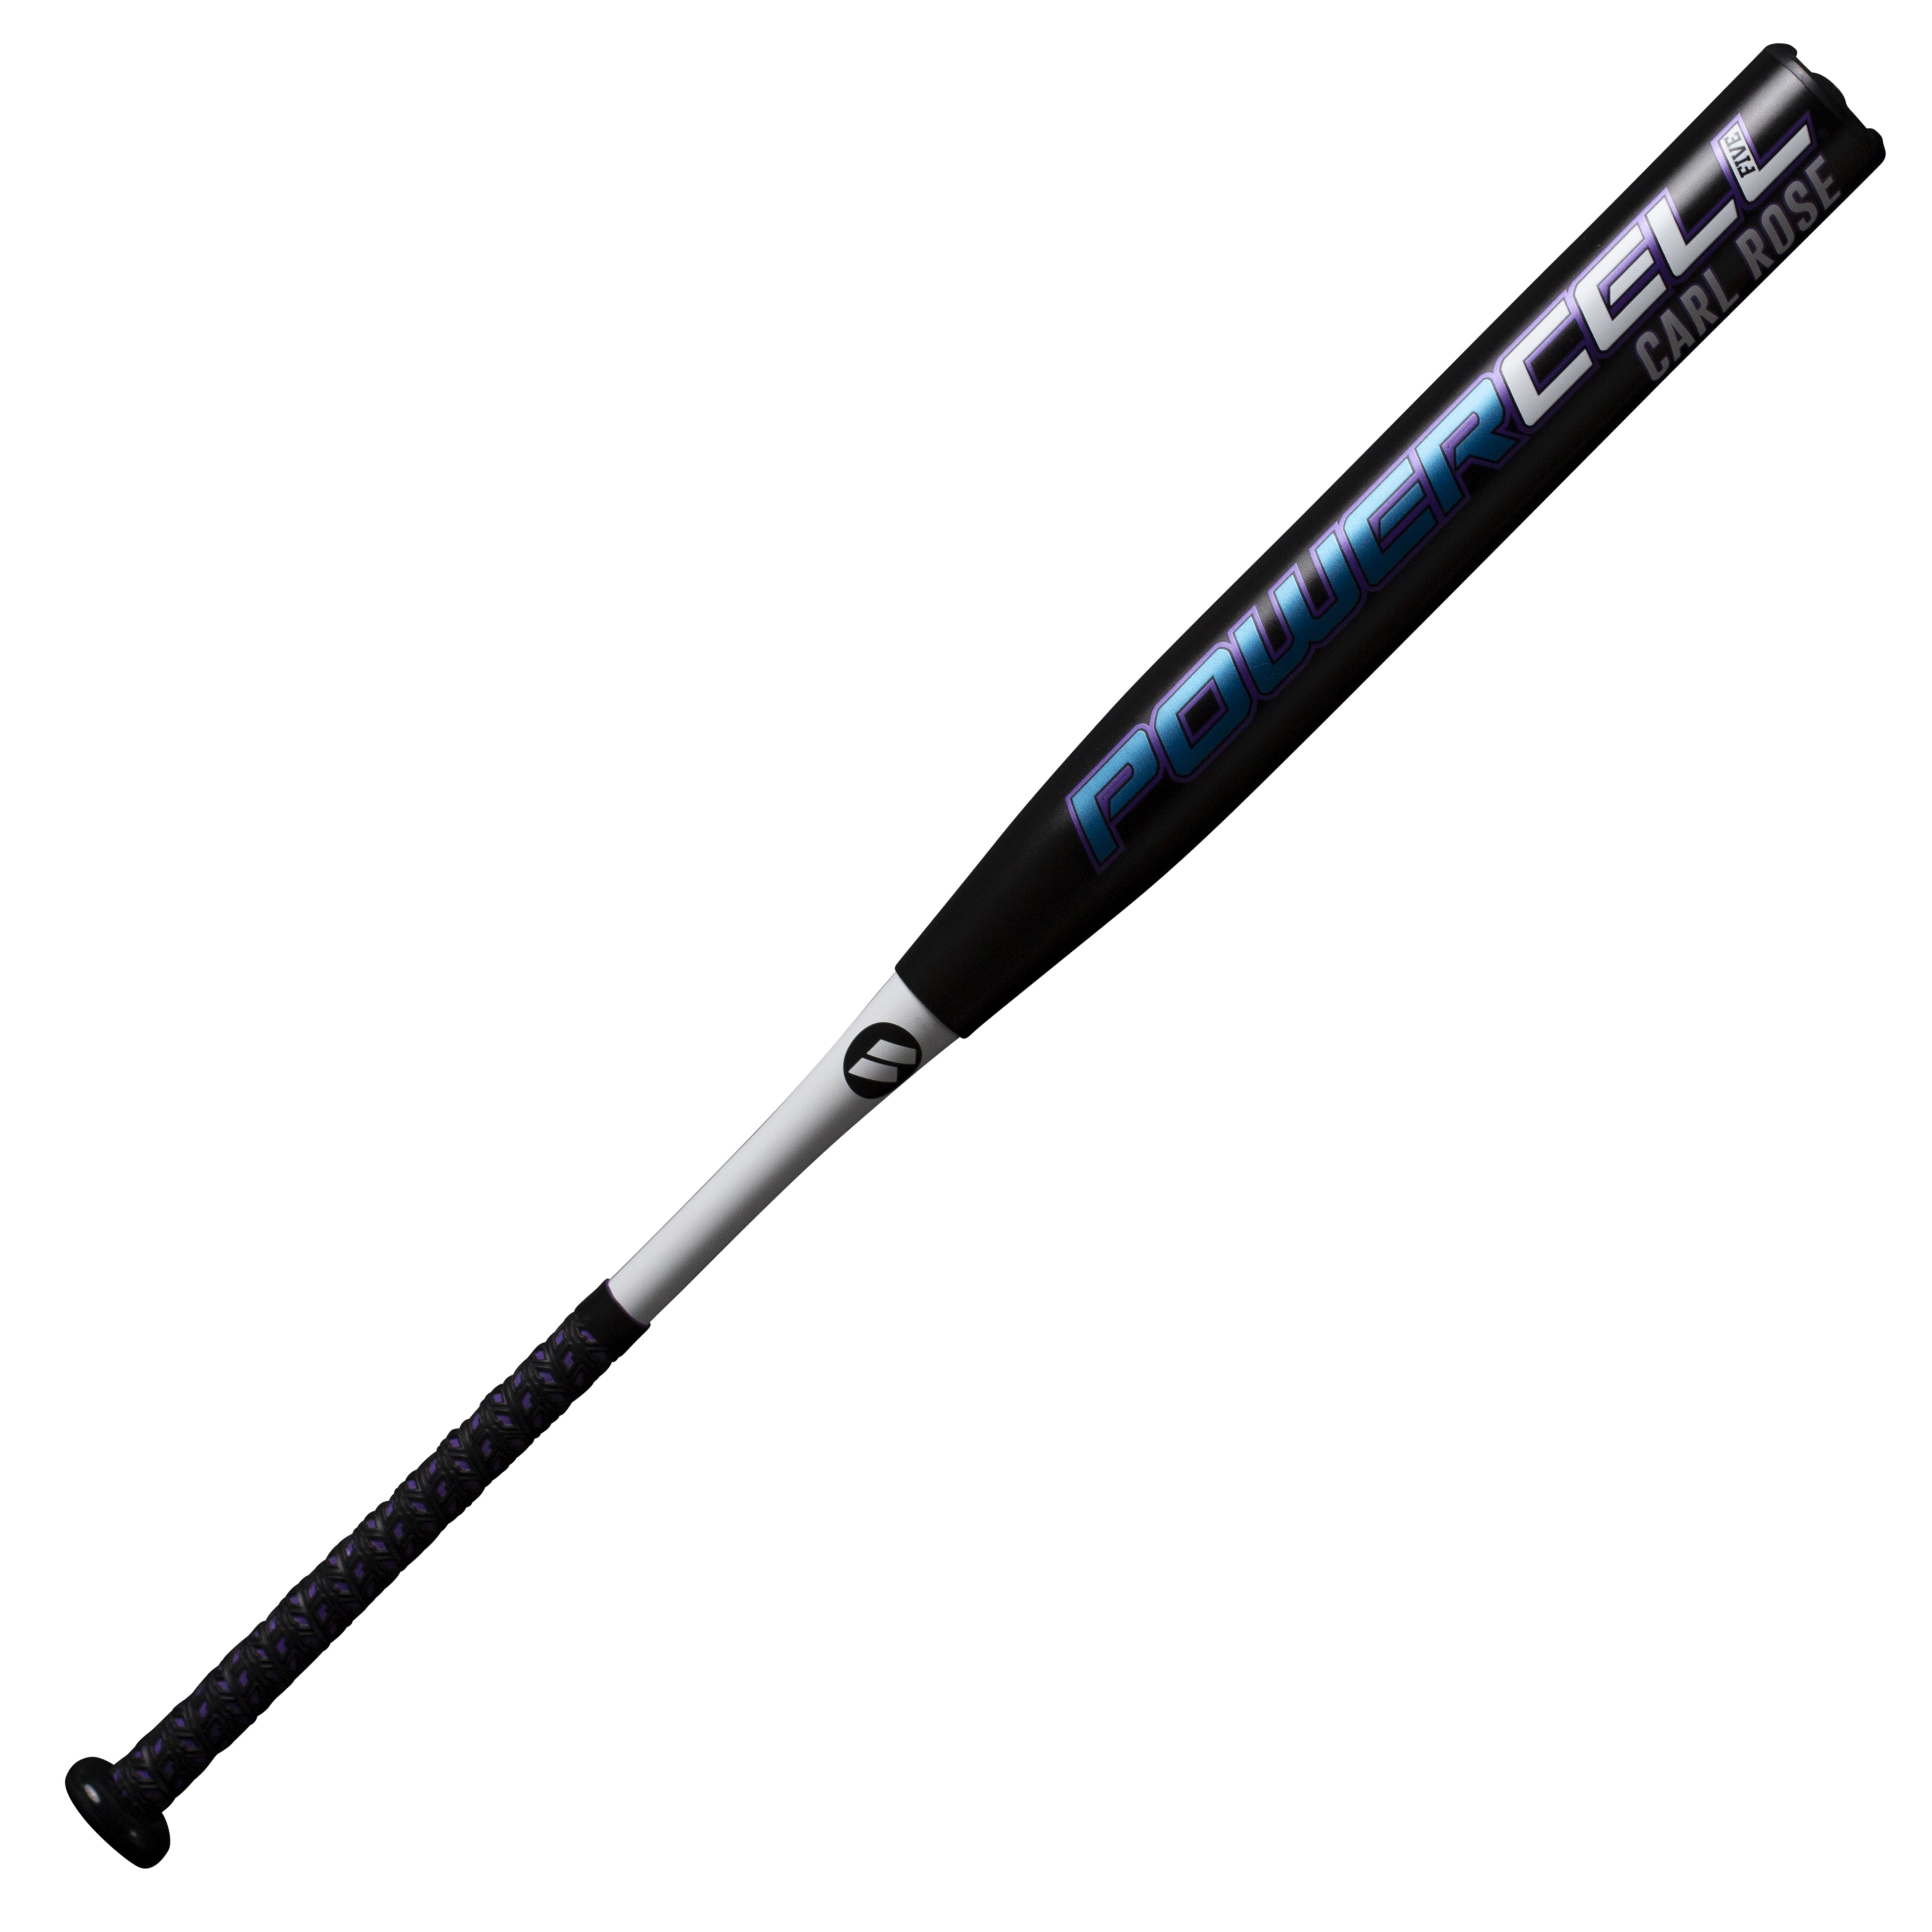 worth-carl-rose-powercell-slowpitch-softball-bat-13-5-usssa-34-inch-27-oz WCARLU-3-27 Worth 043365360938 <p>Worth Softball Bat honoring Carl Rose. The 2021 Worth Slow pitch